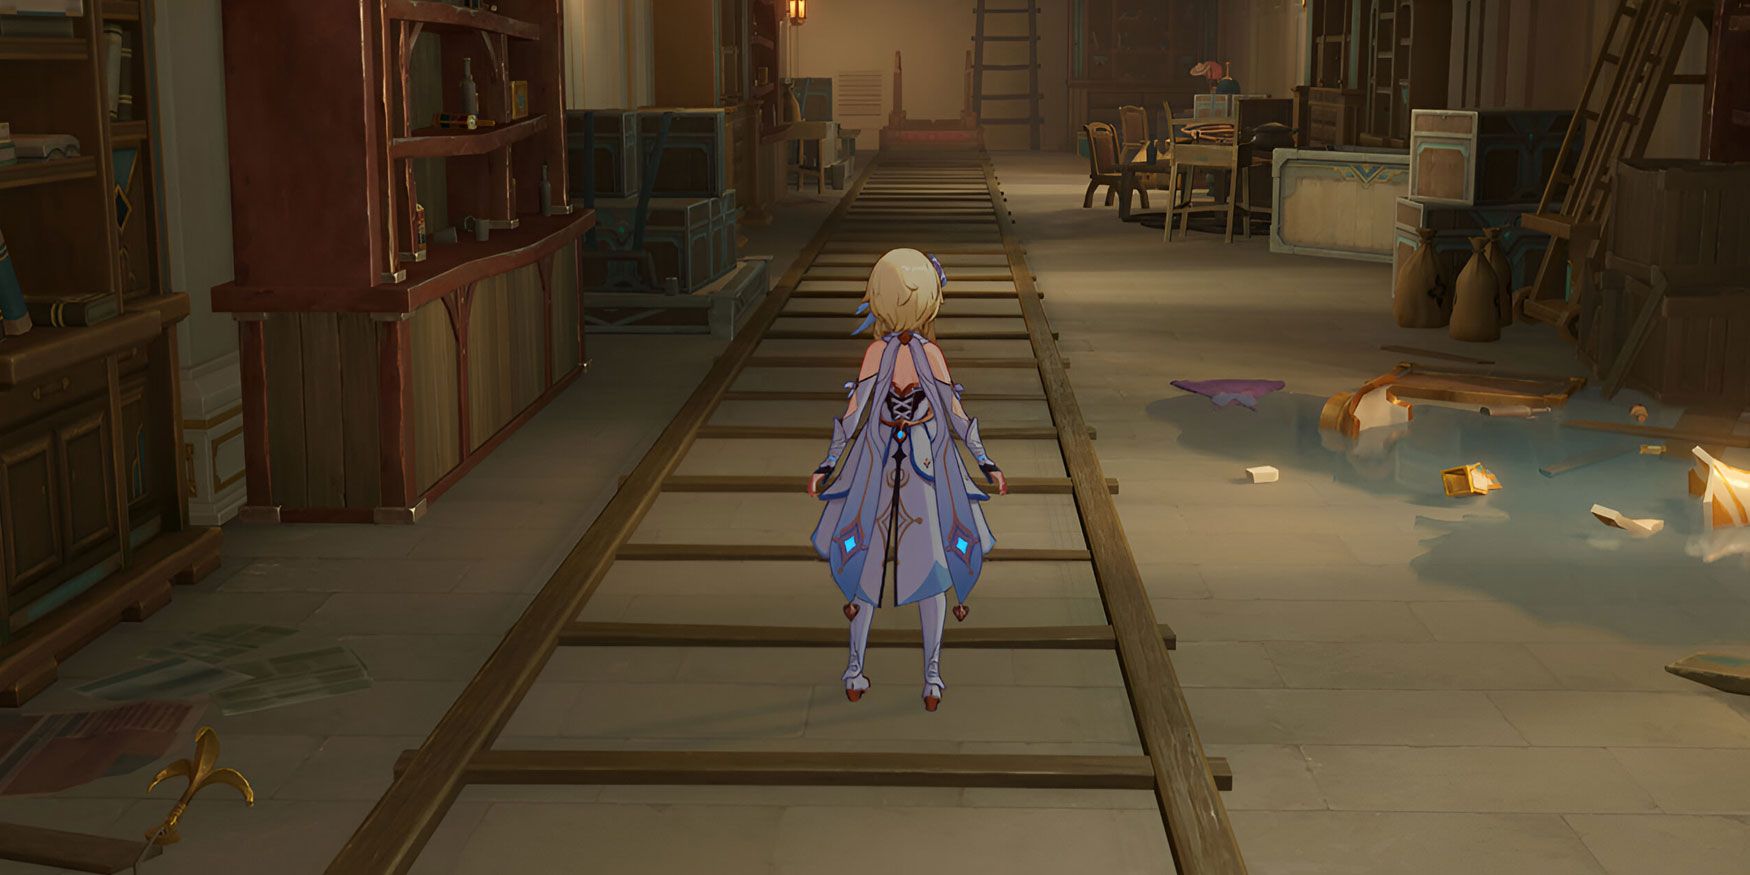 A shot of Lumine, the female Traveler, looking ahead in the Underground Passage in the Opera house in Genshin Impact.